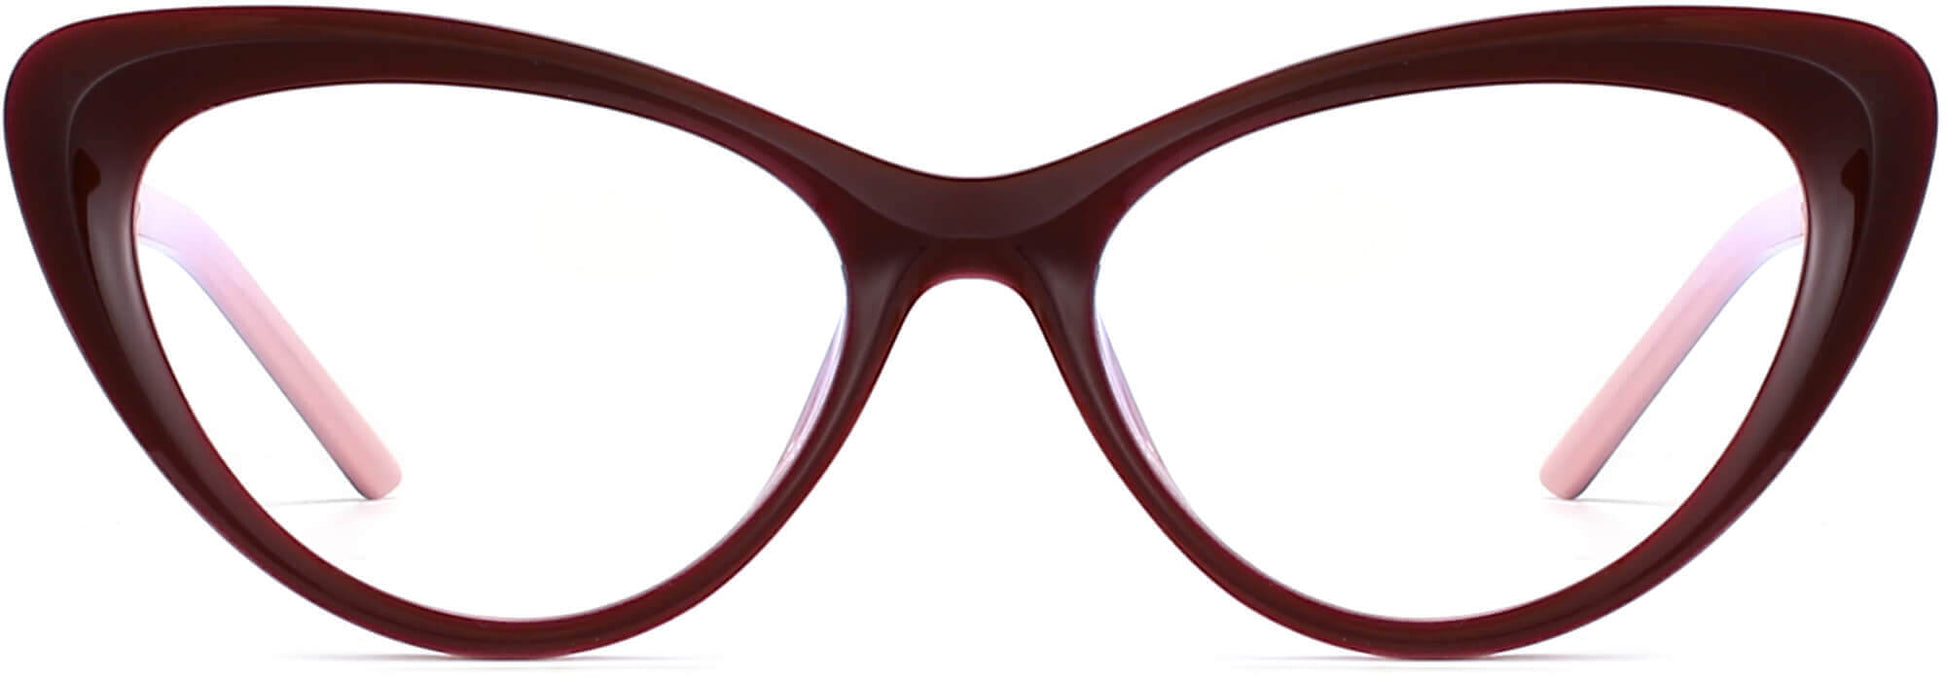 Drew Cateye Pink Eyeglasses from ANRRI, front view